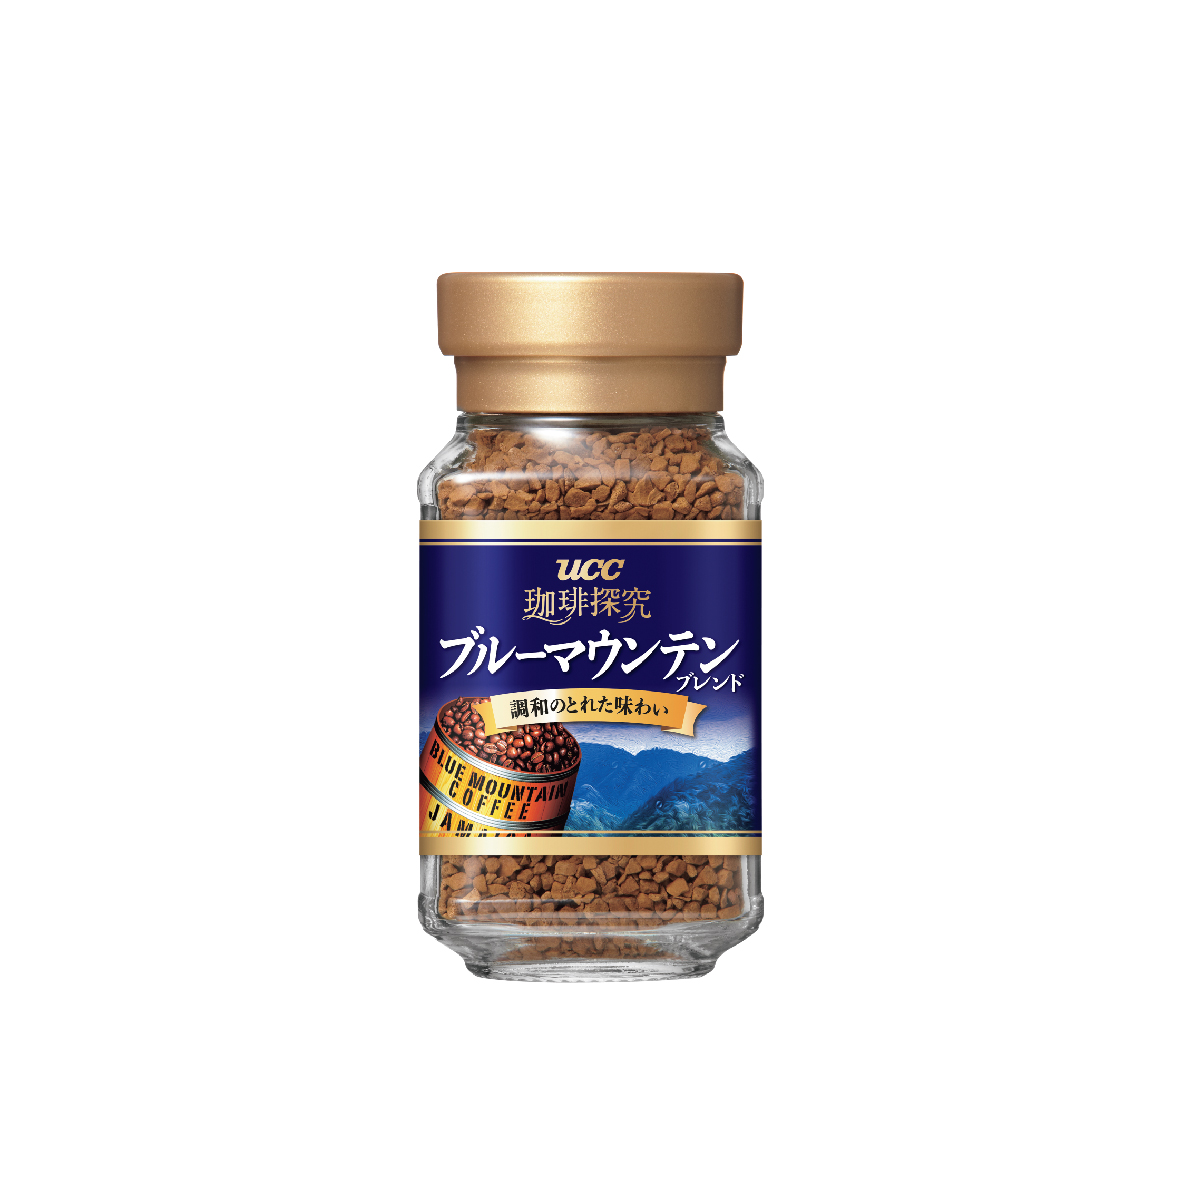 UCC Coffee Exploration Blue Mountain Instant Coffee